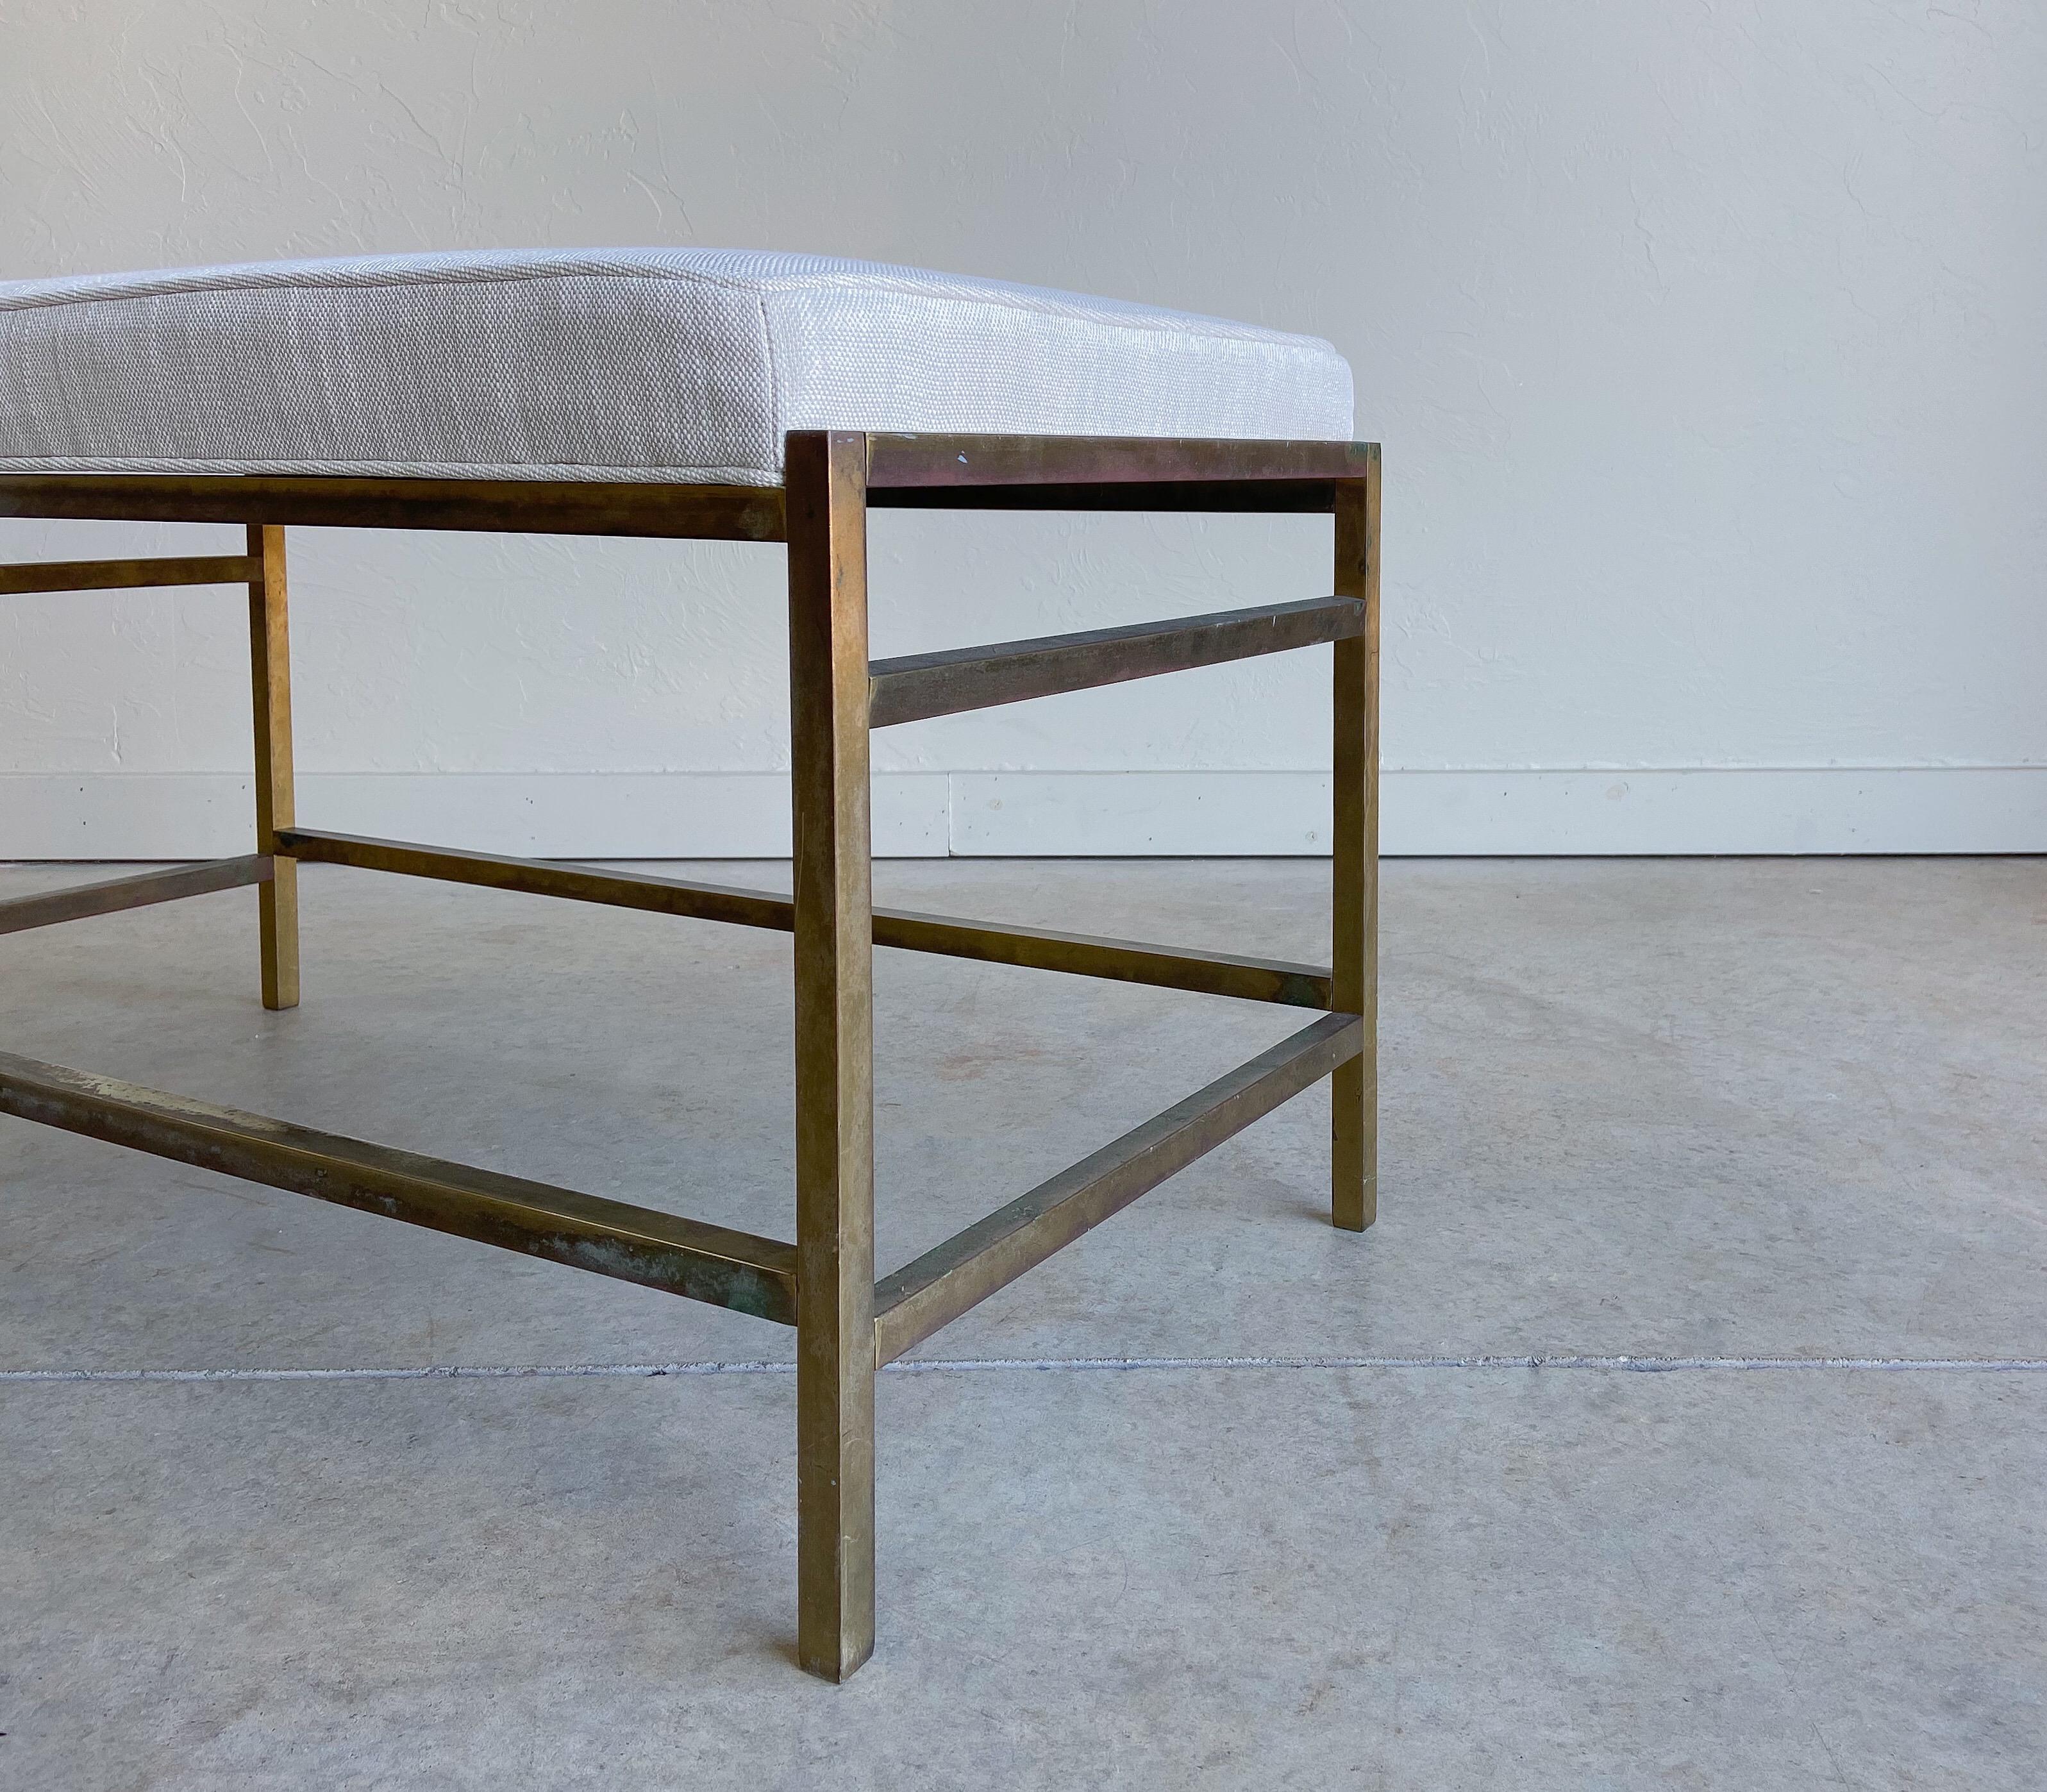 20th Century Mid-Century Modern Architectural Brass Bench in the style of Harvey Probber